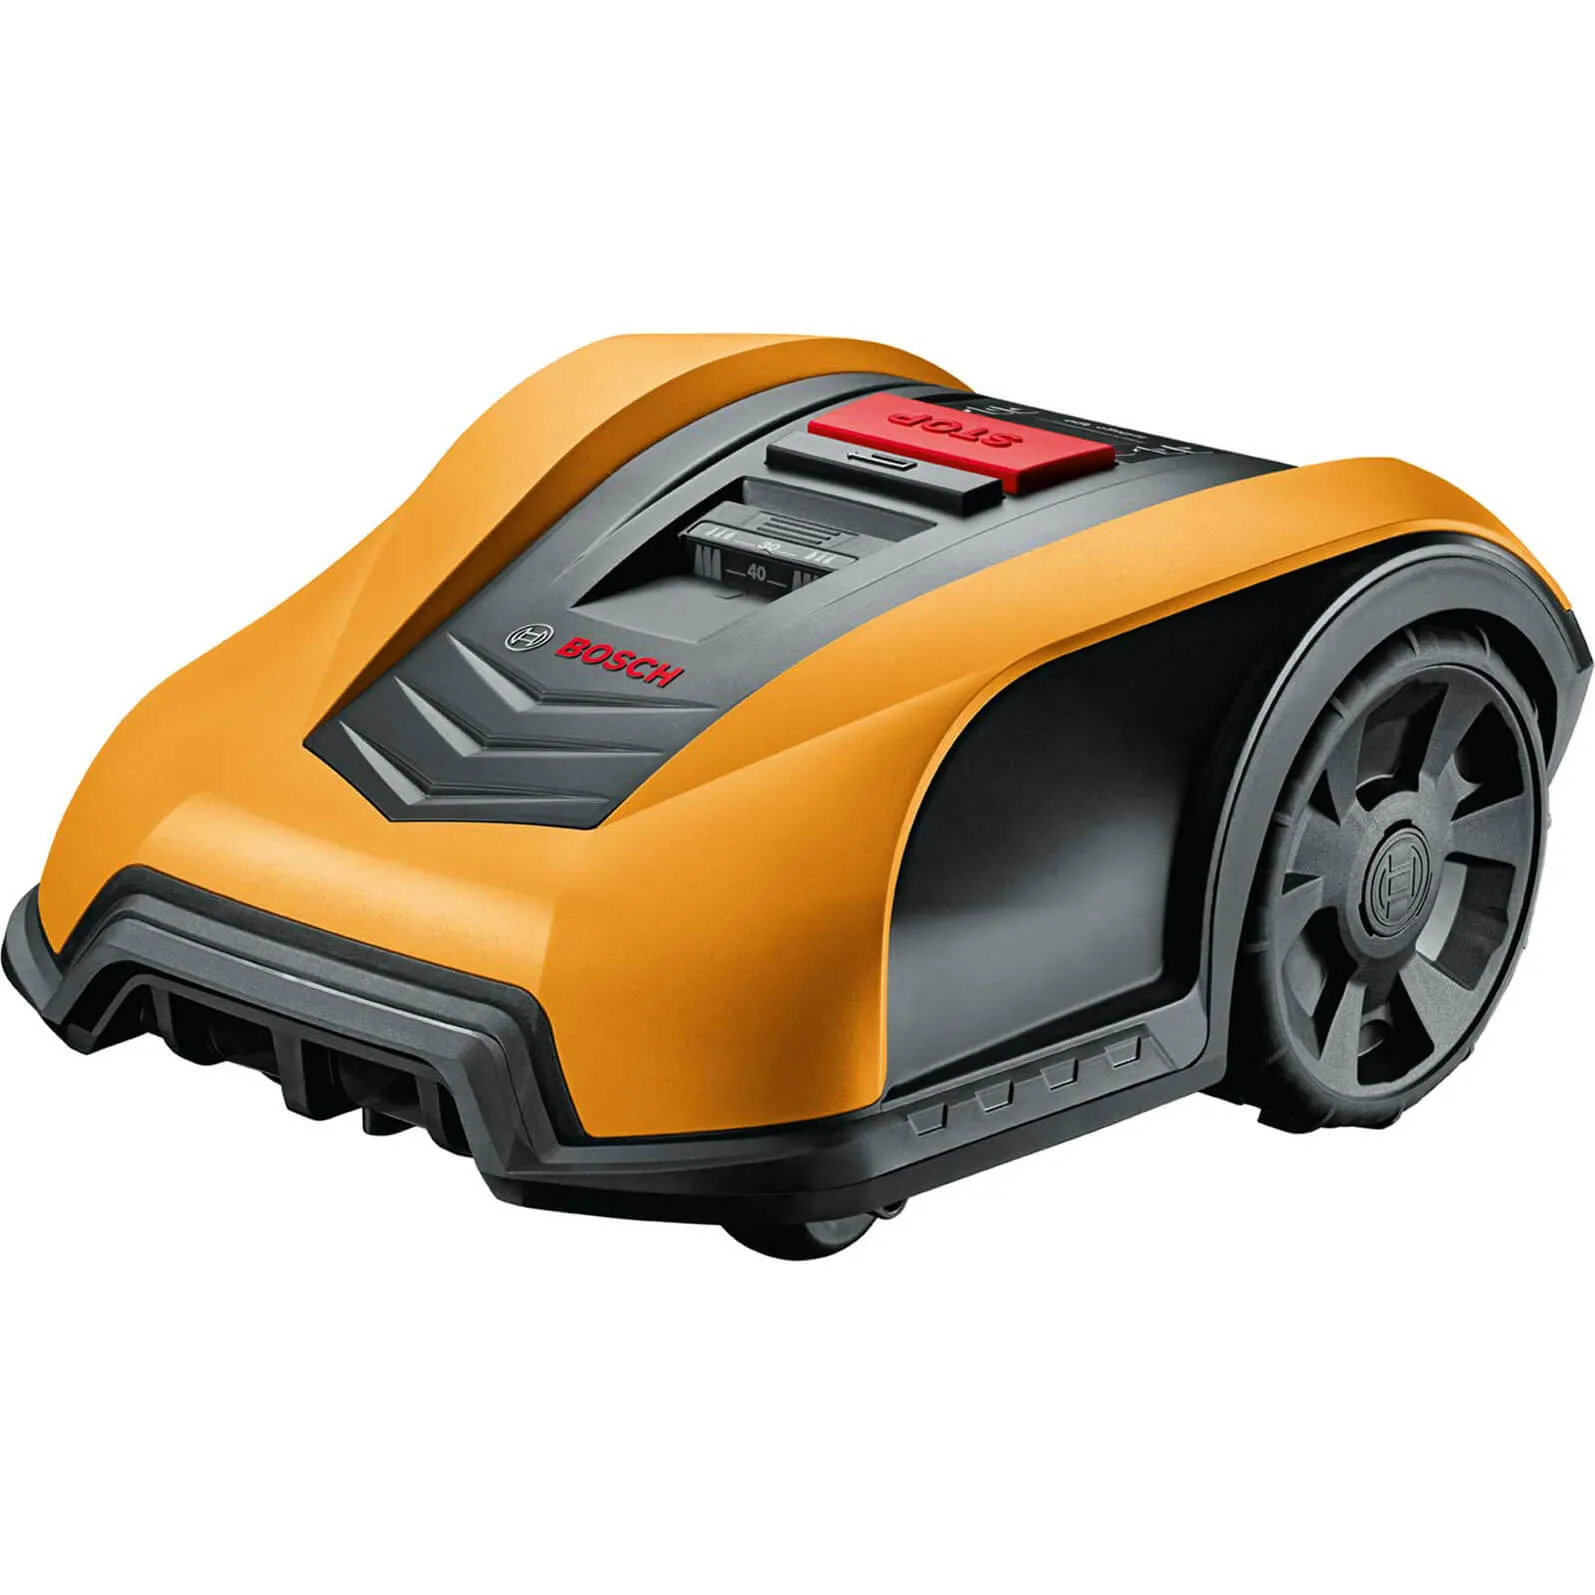 Bosch Top Cover for Indego Lawnmowers - Orange / Yellow